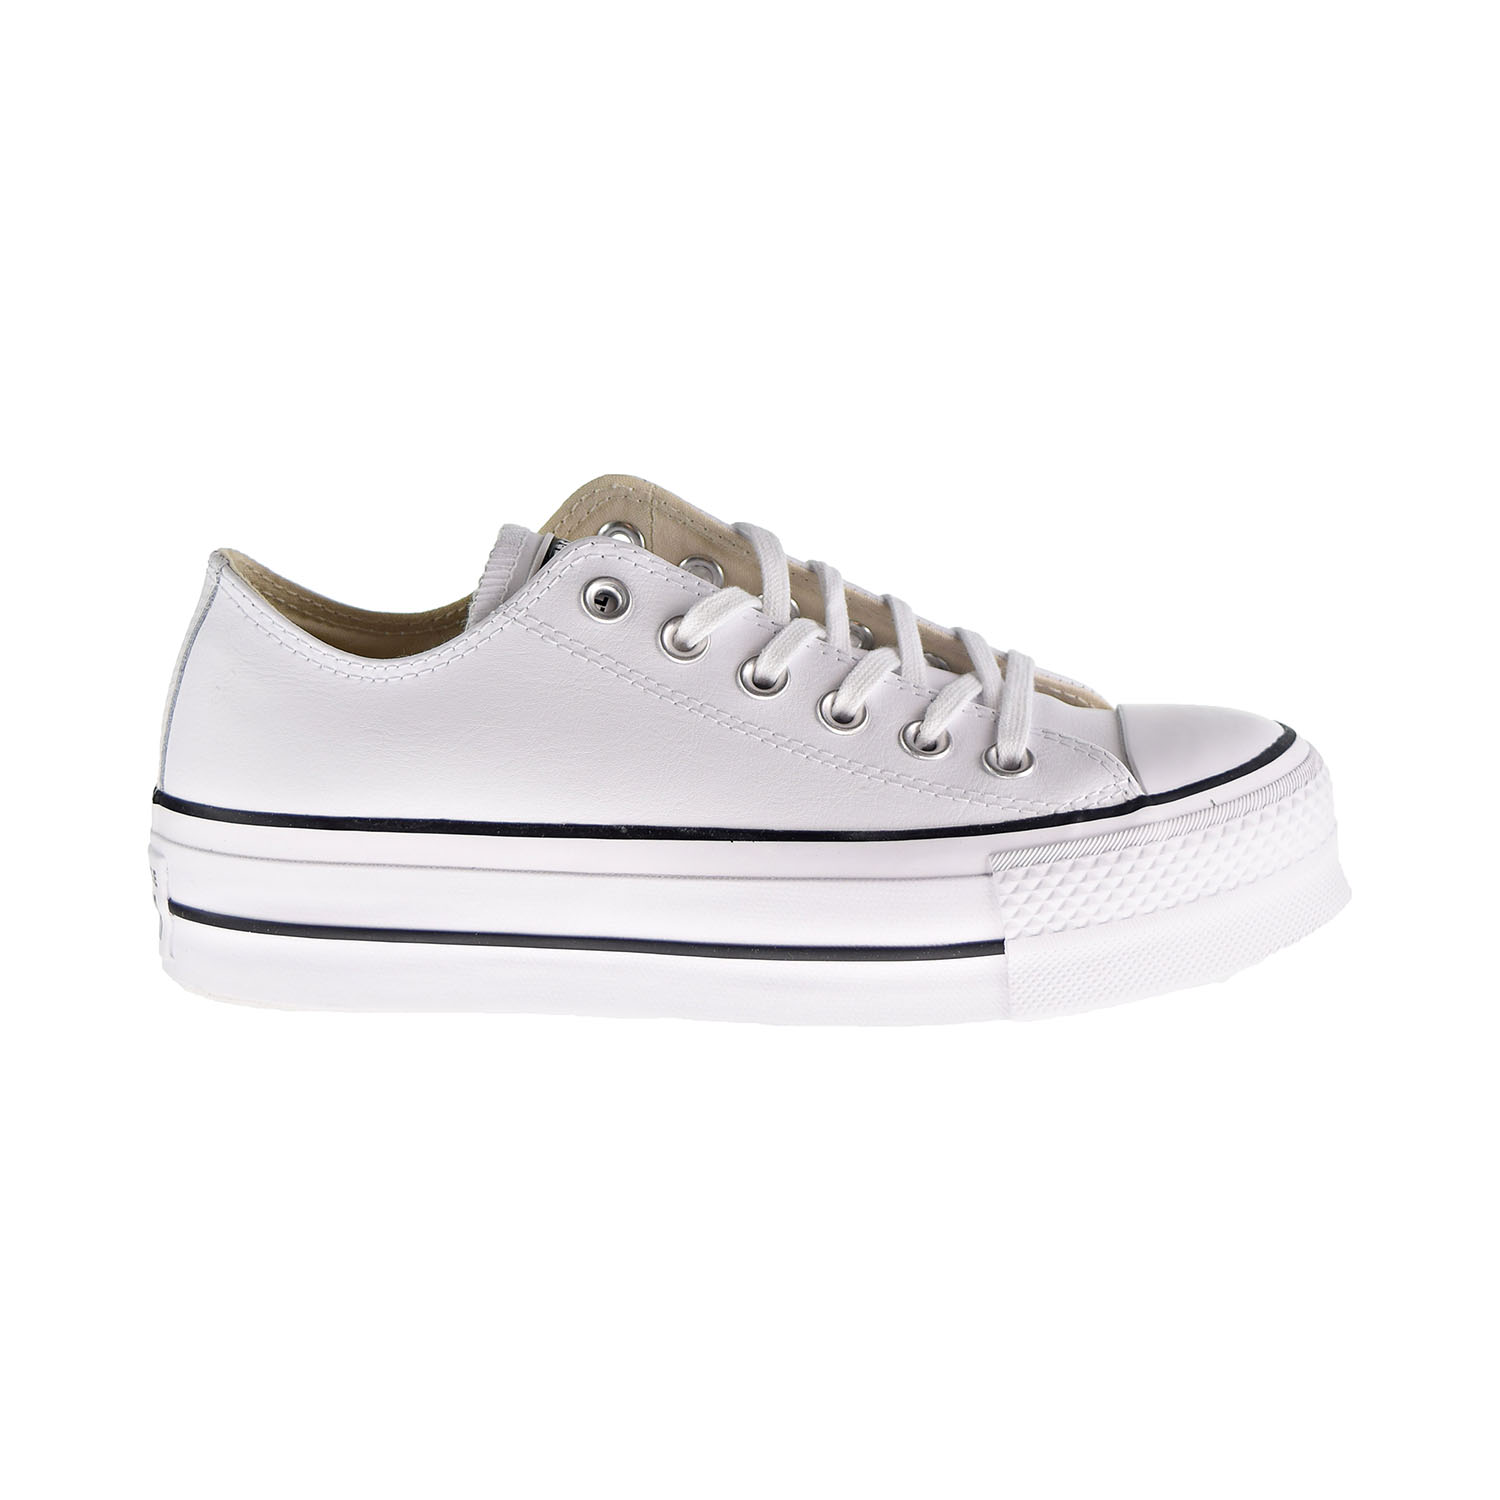 converse chuck taylor all star leather platform low trainers in black